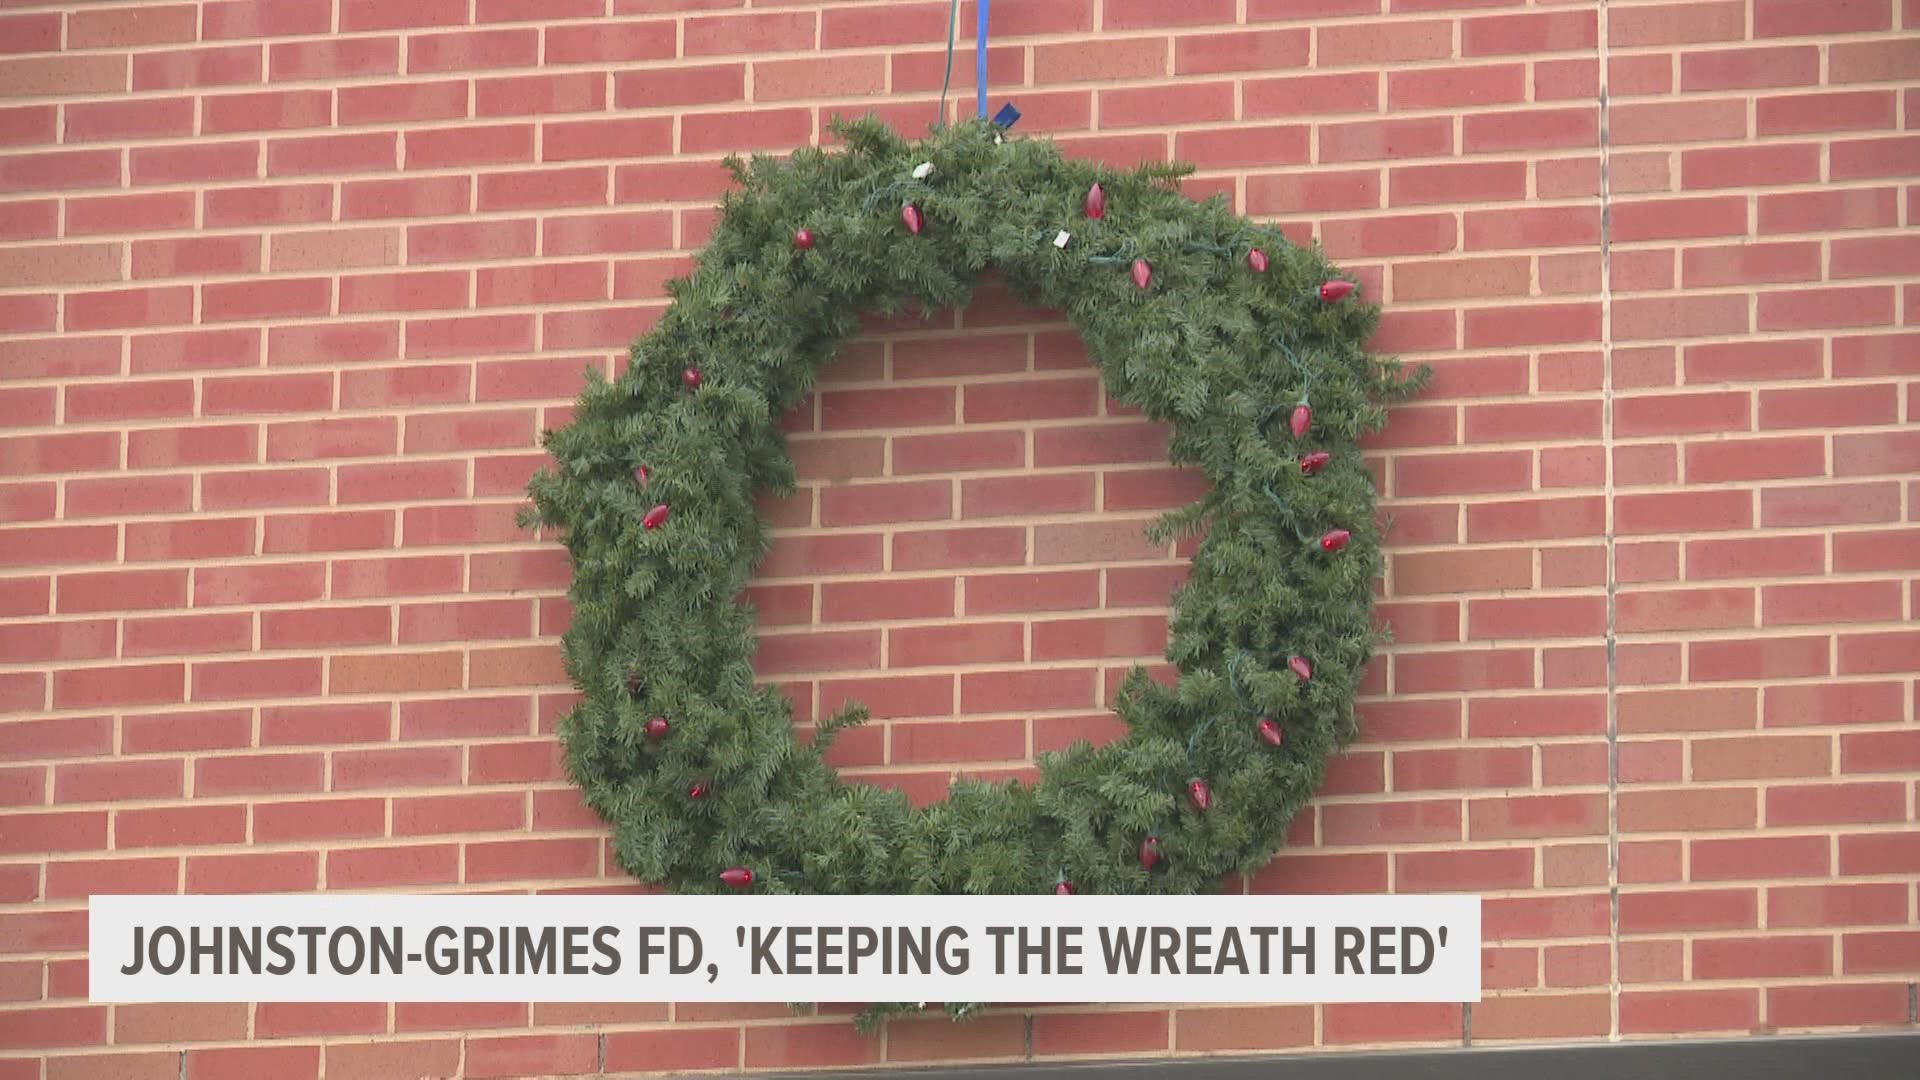 By keeping the wreath red, the fire departments hope to raise awareness for home fires during the holidays due to common festive decorations.